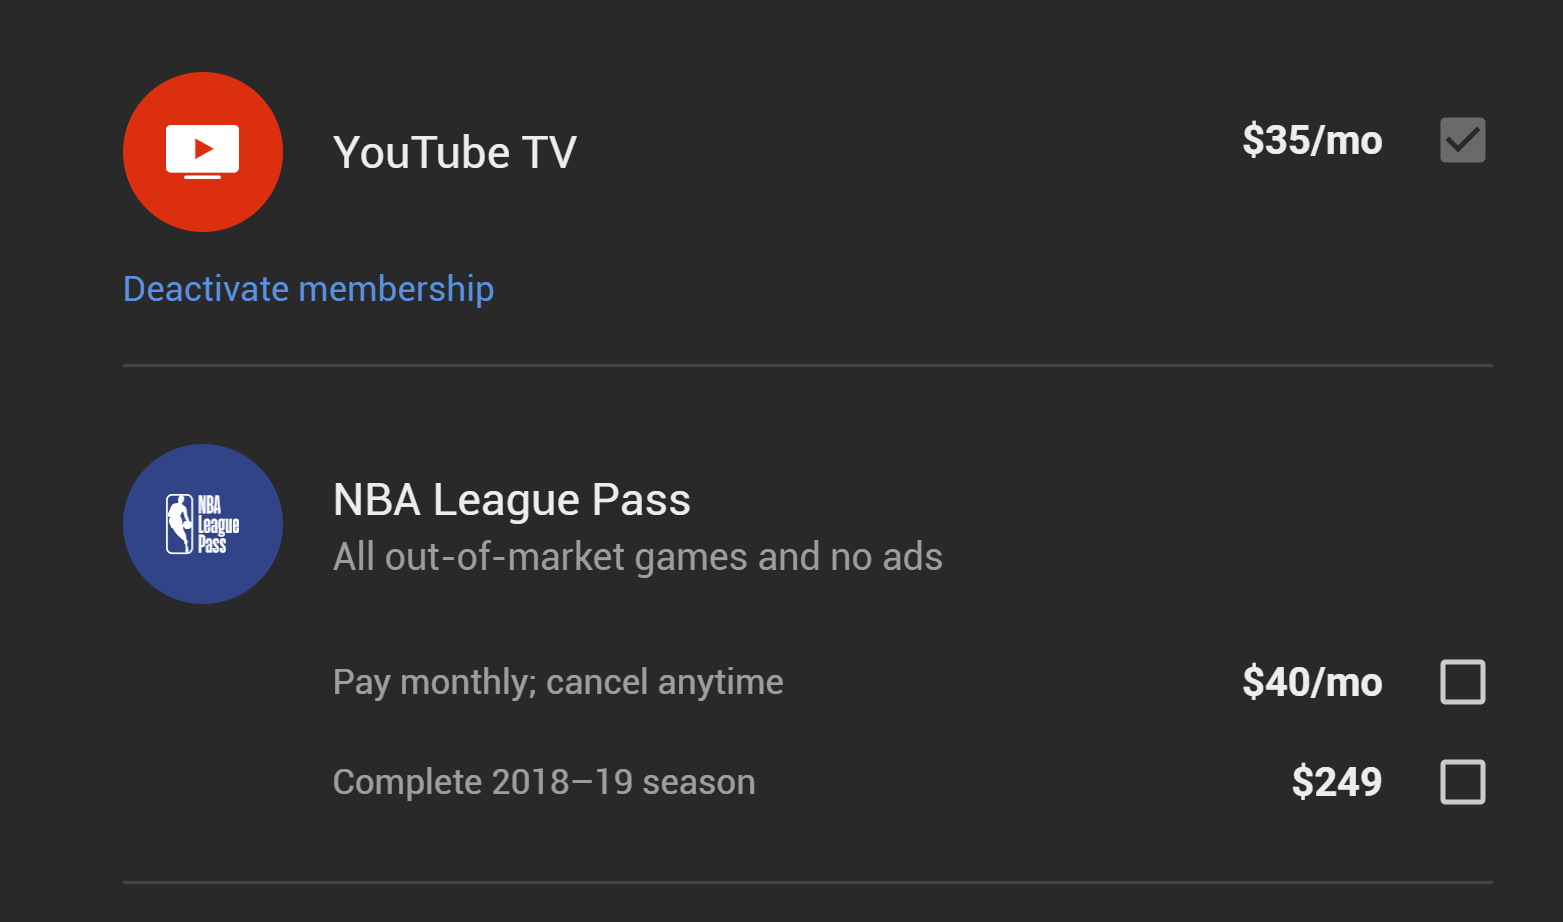 nba league pass with youtube tv